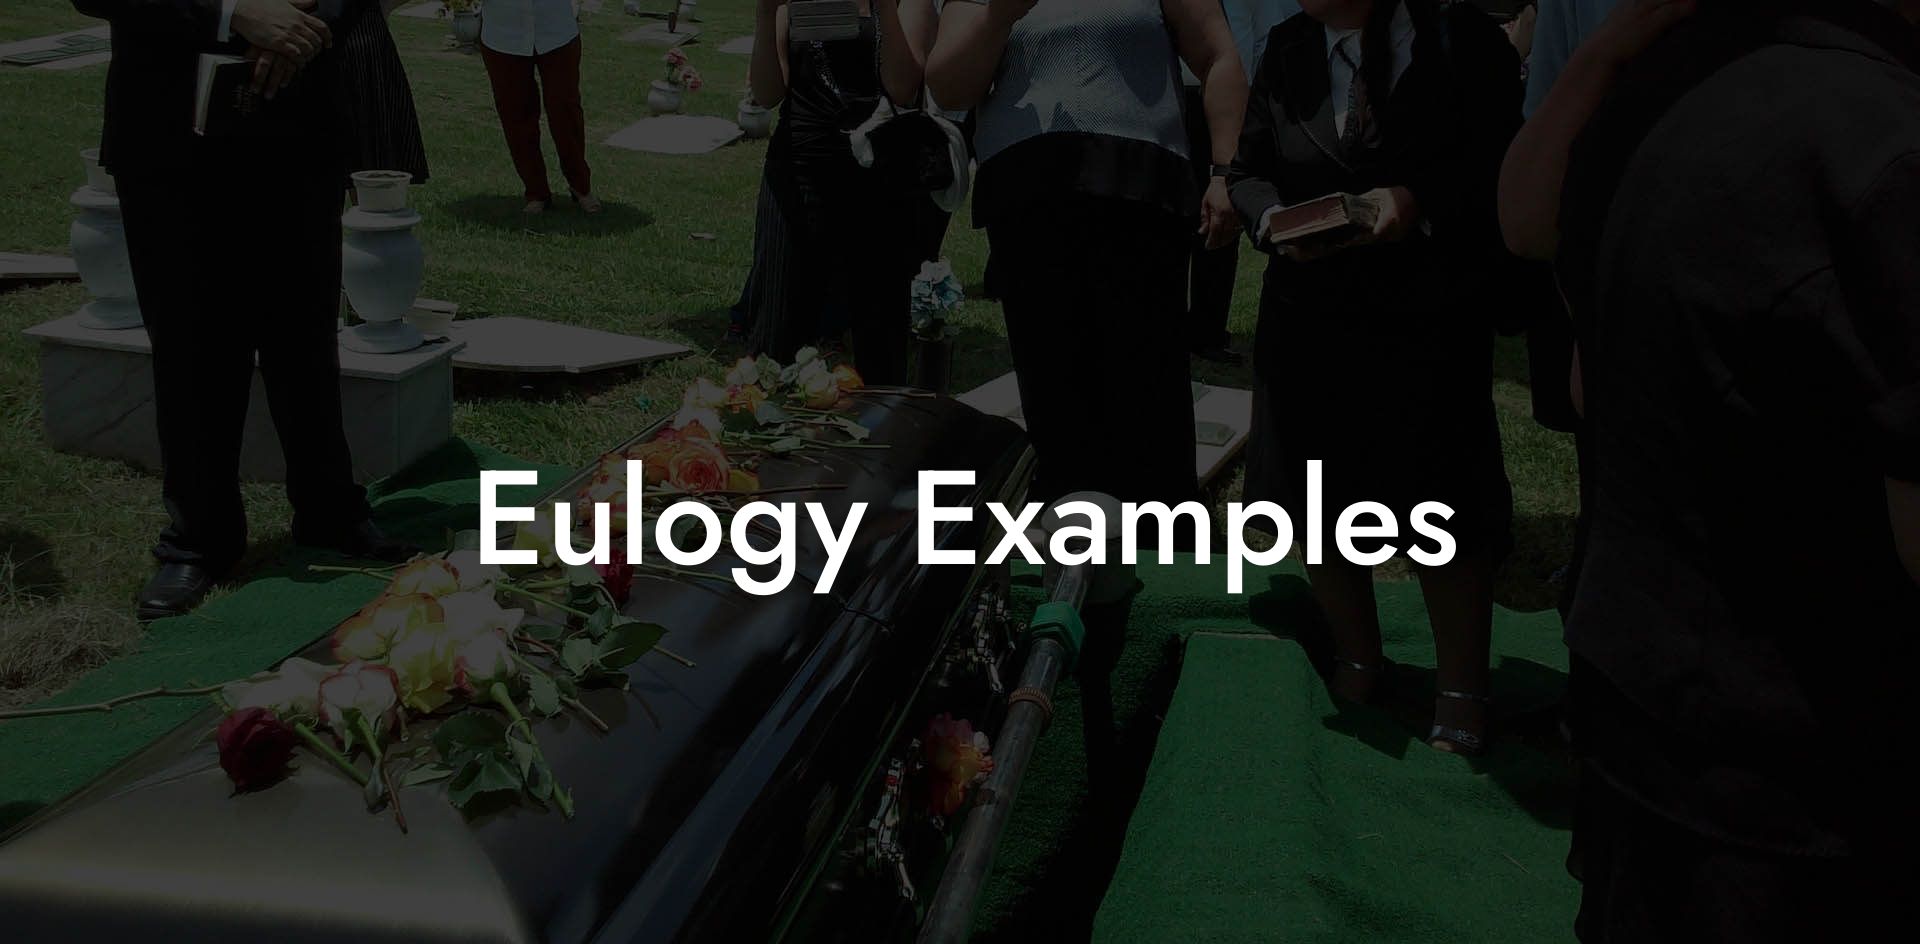 Eulogy Examples